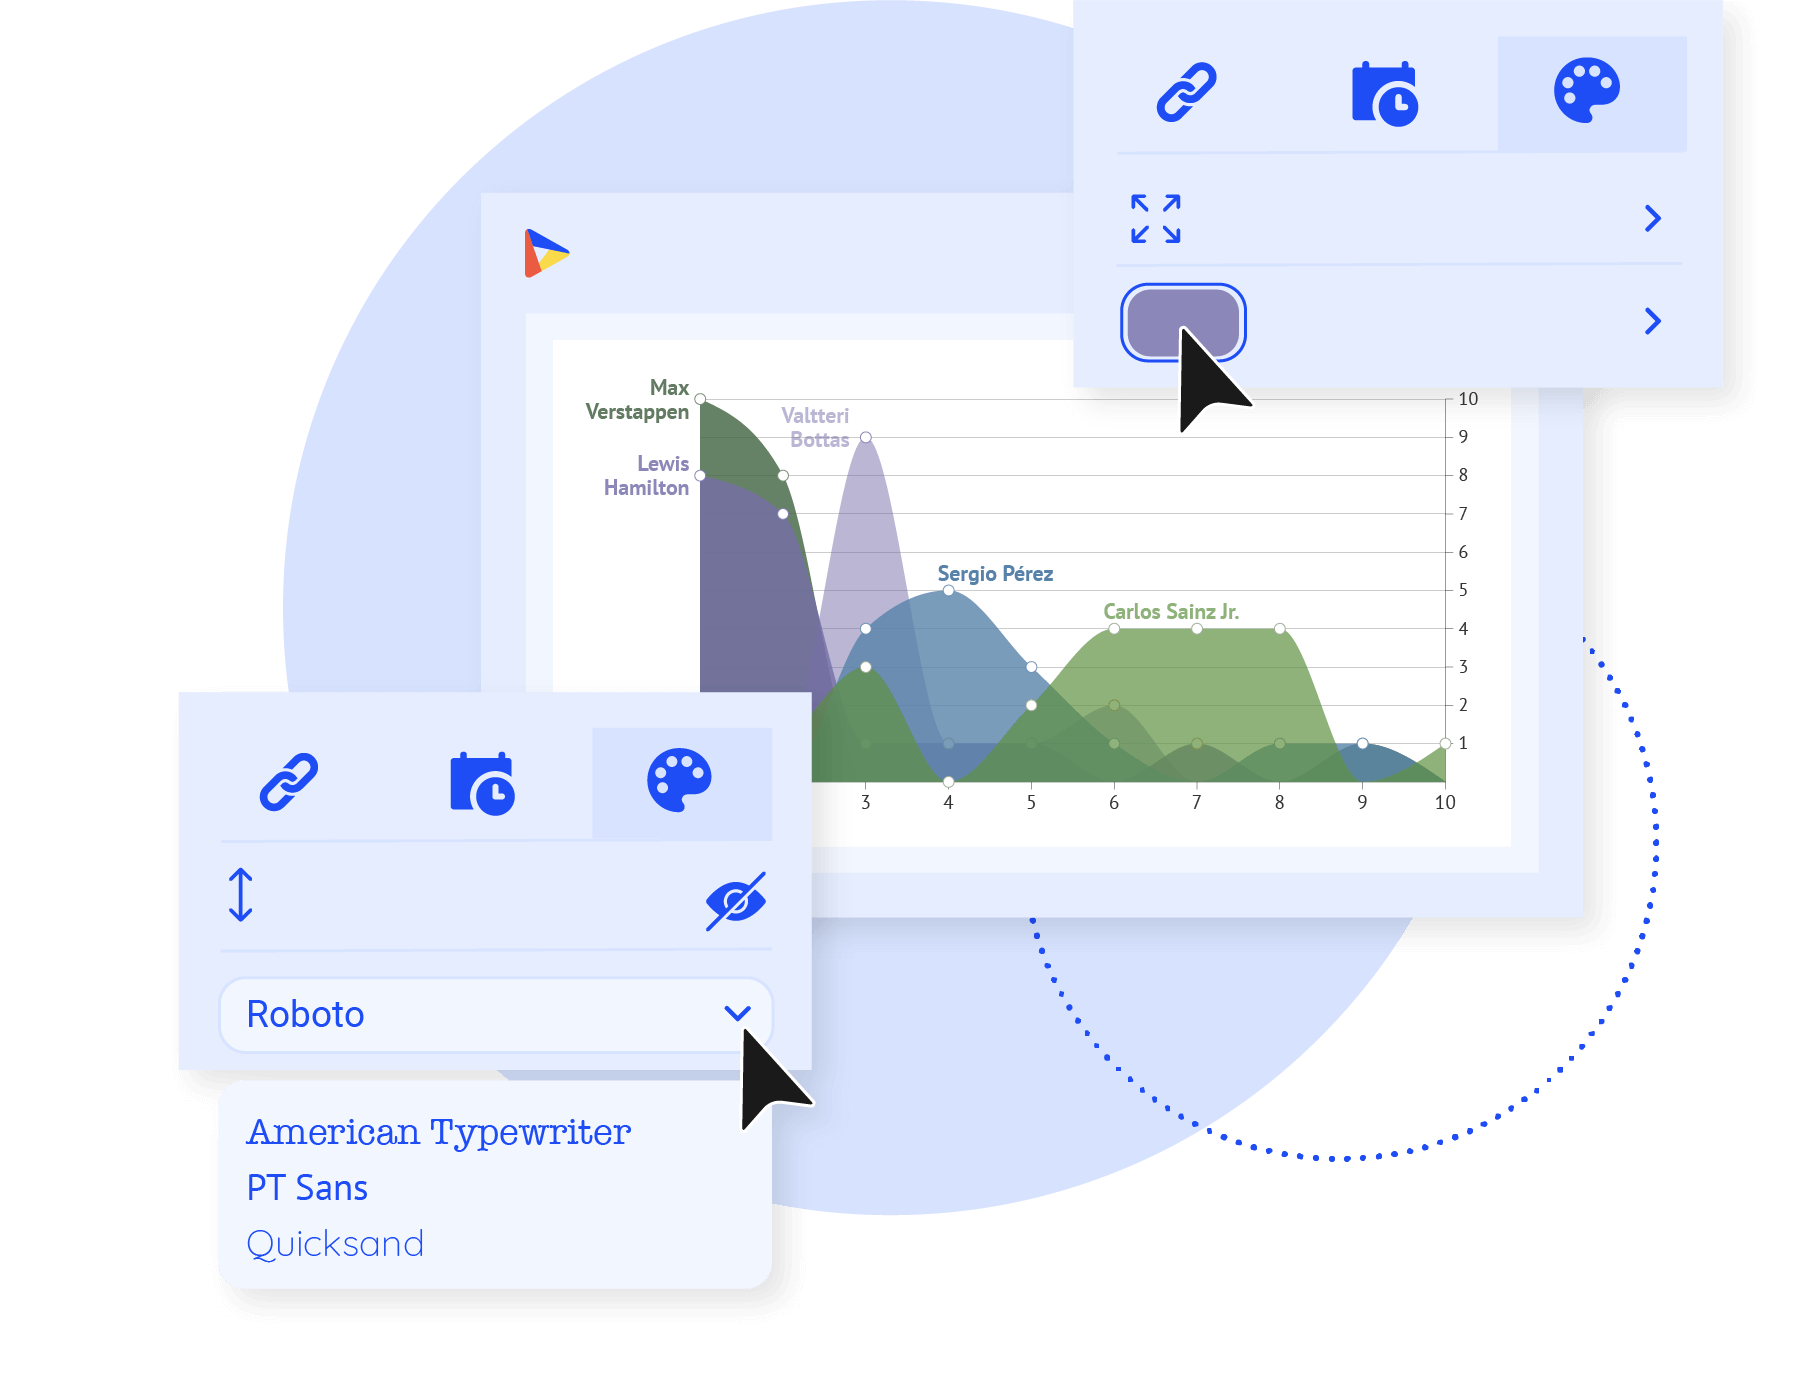 Make charts beautiful again - Stand out from the crowd! Boost your dataviz power with a set of unrivaled chart design features. Use Datylon to supercharge your data visualization projects and truly impress your audience.